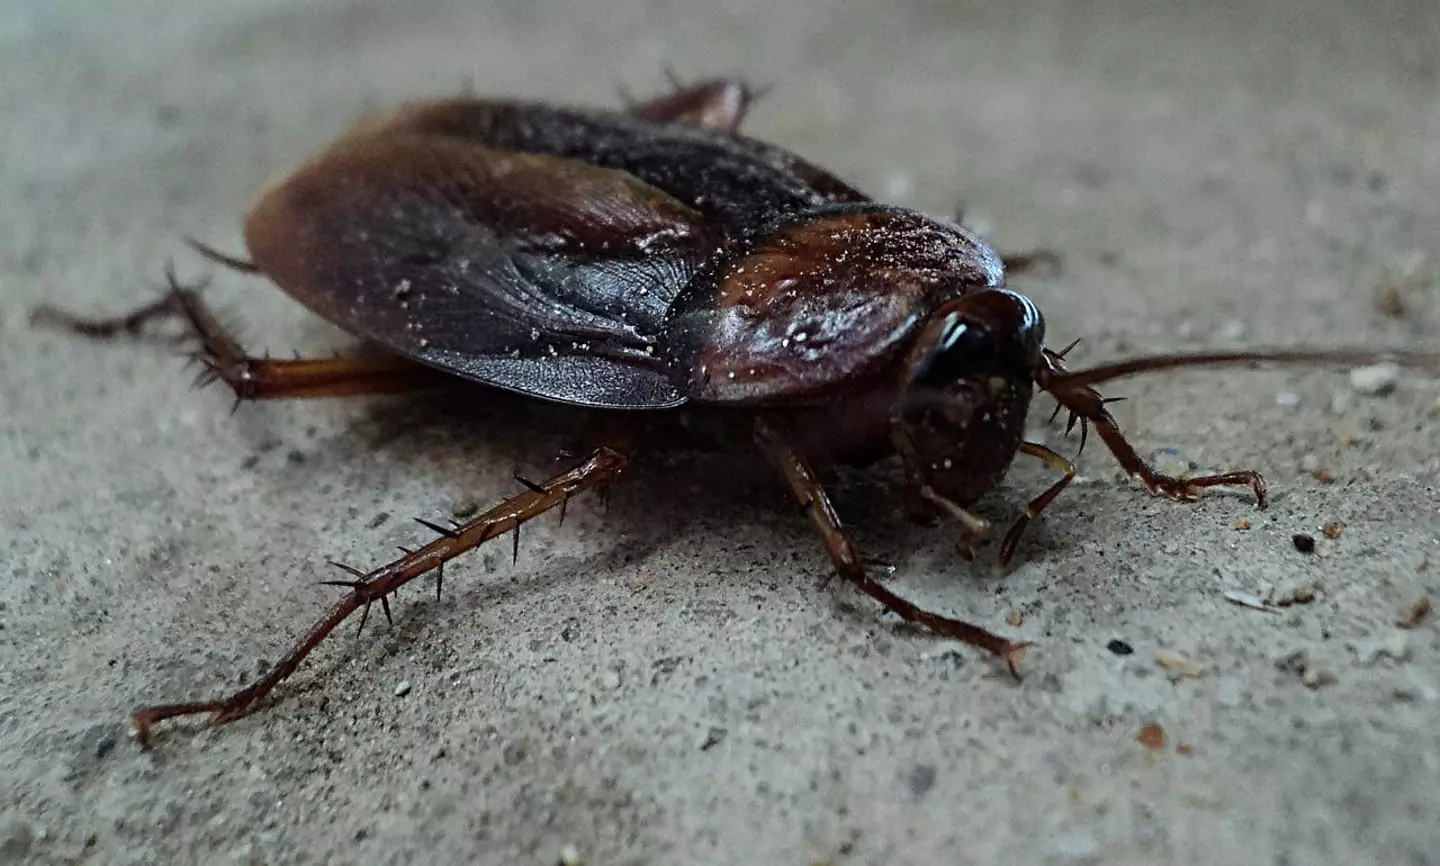 Approximately 100 cockroaches will be released into the homes.